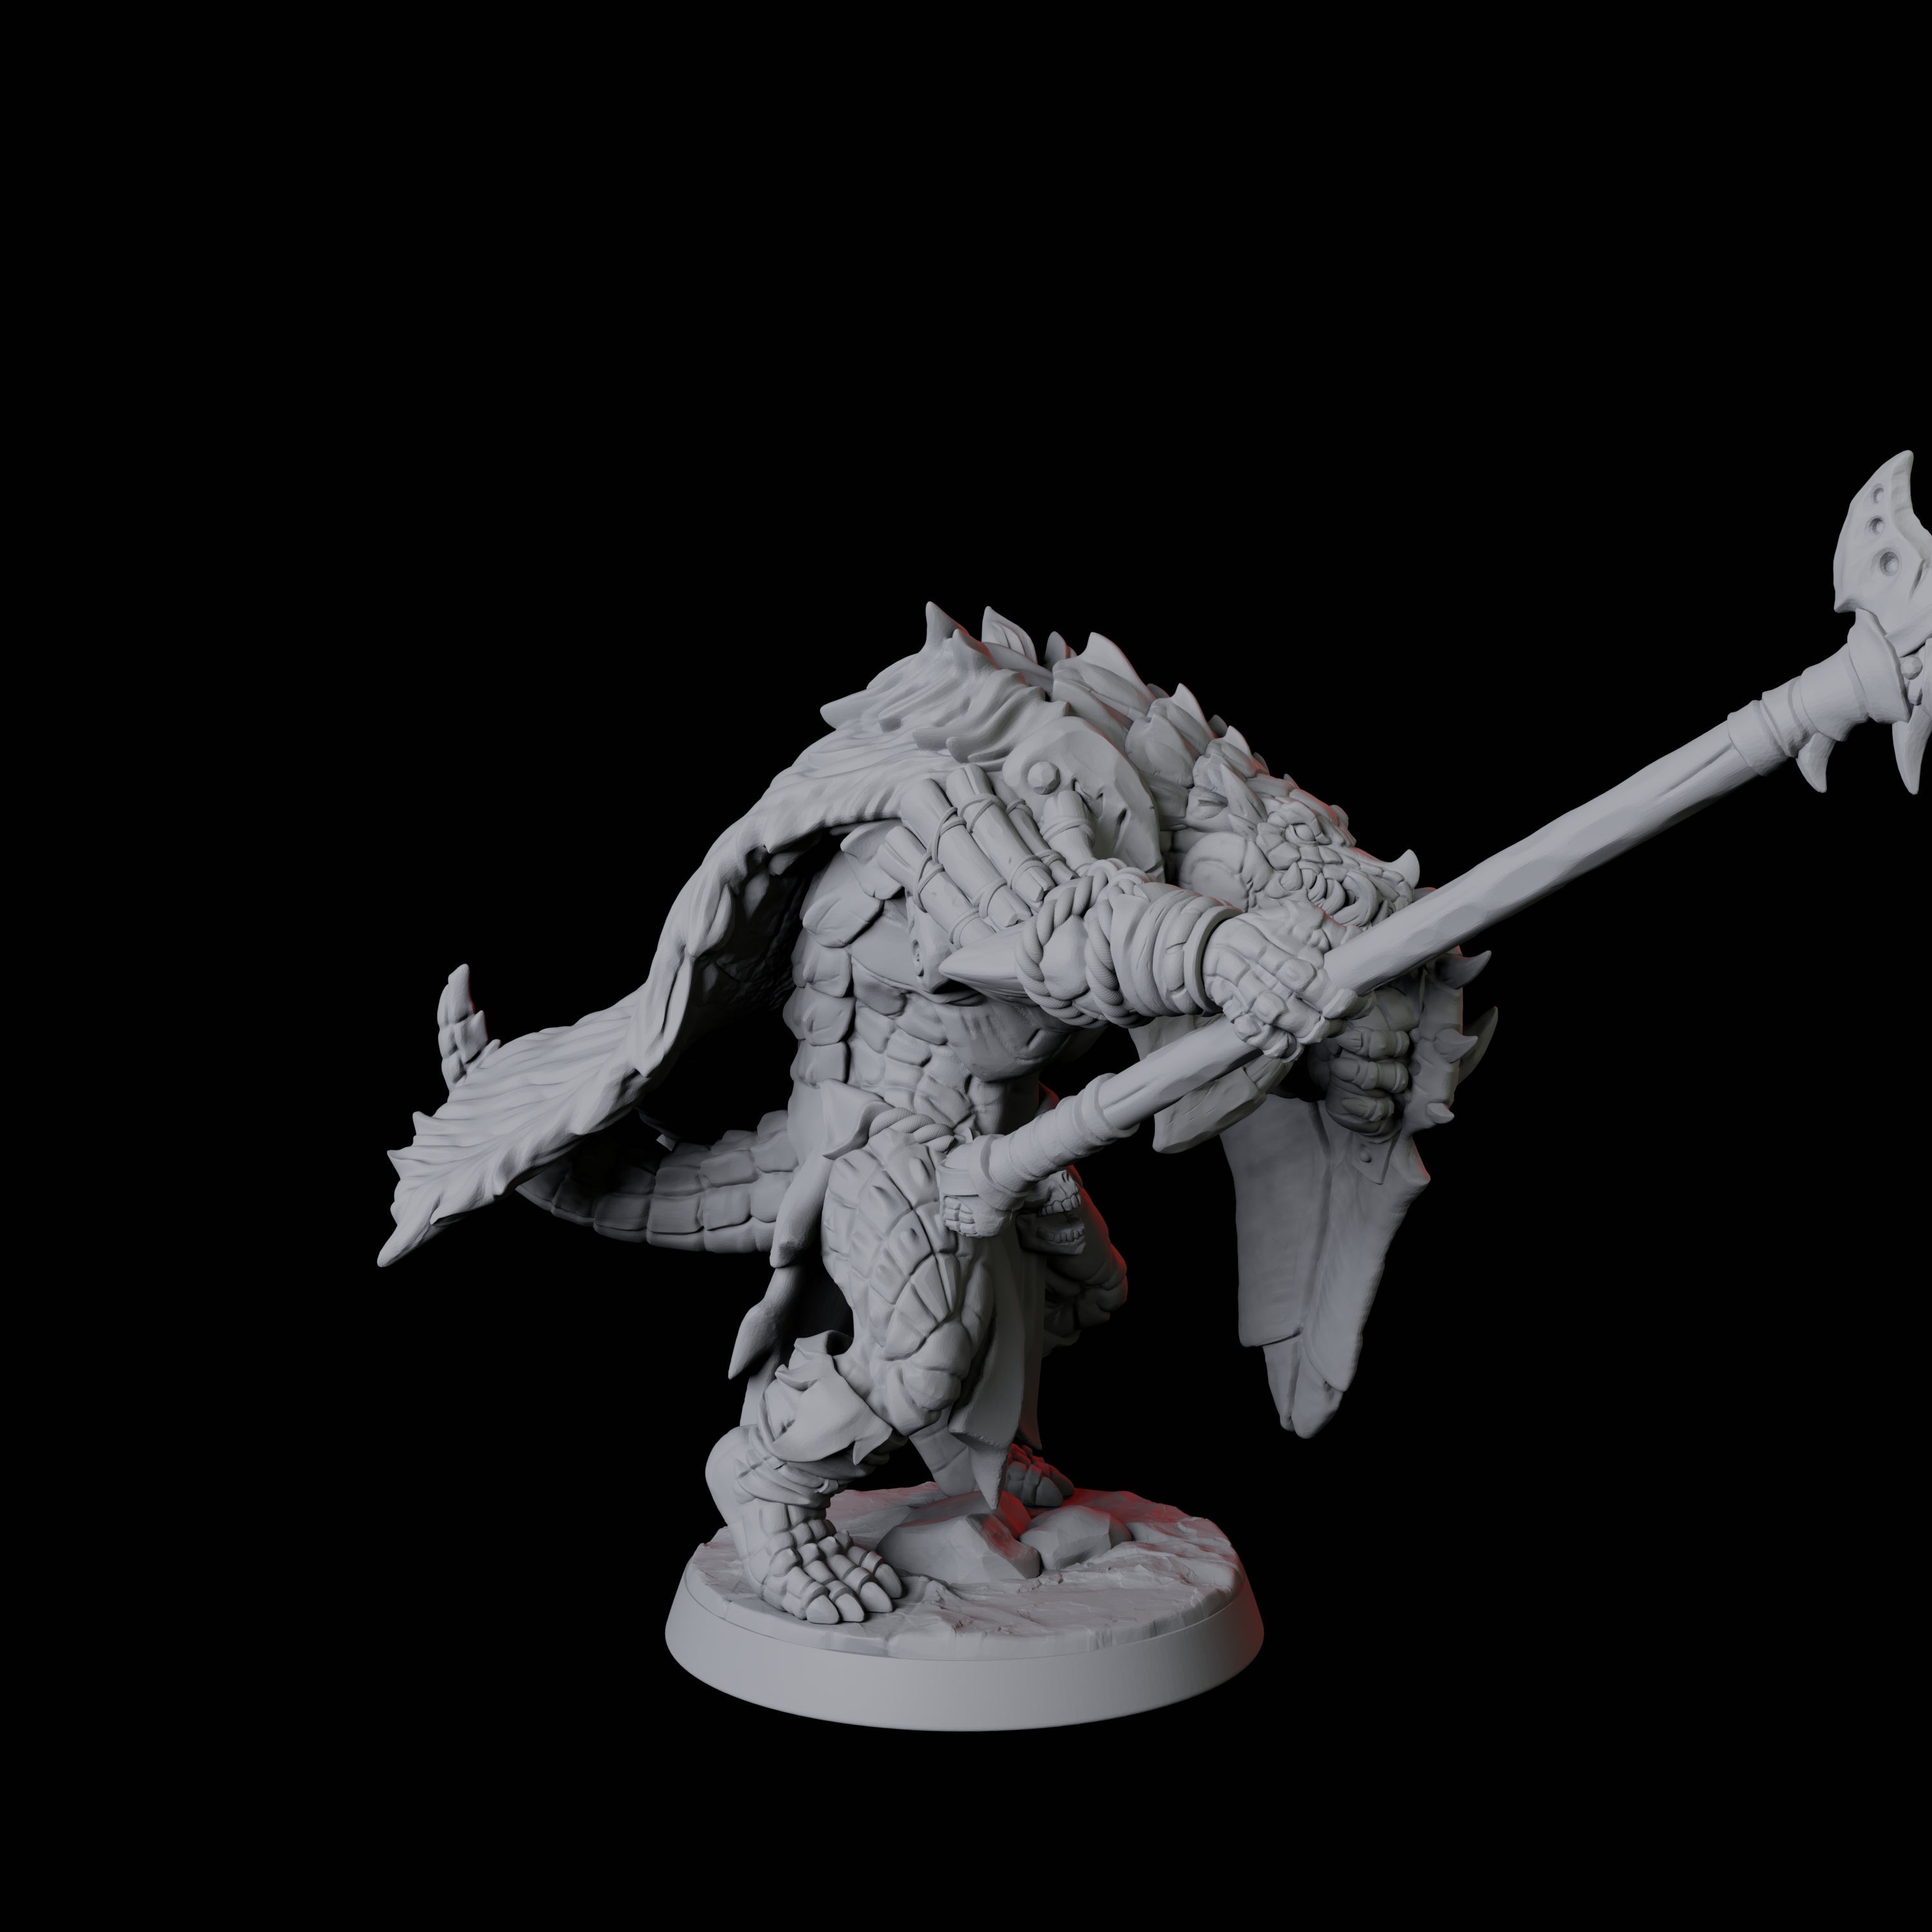 Powerful Frost Lizardfolk F Miniature for Dungeons and Dragons, Pathfinder or other TTRPGs